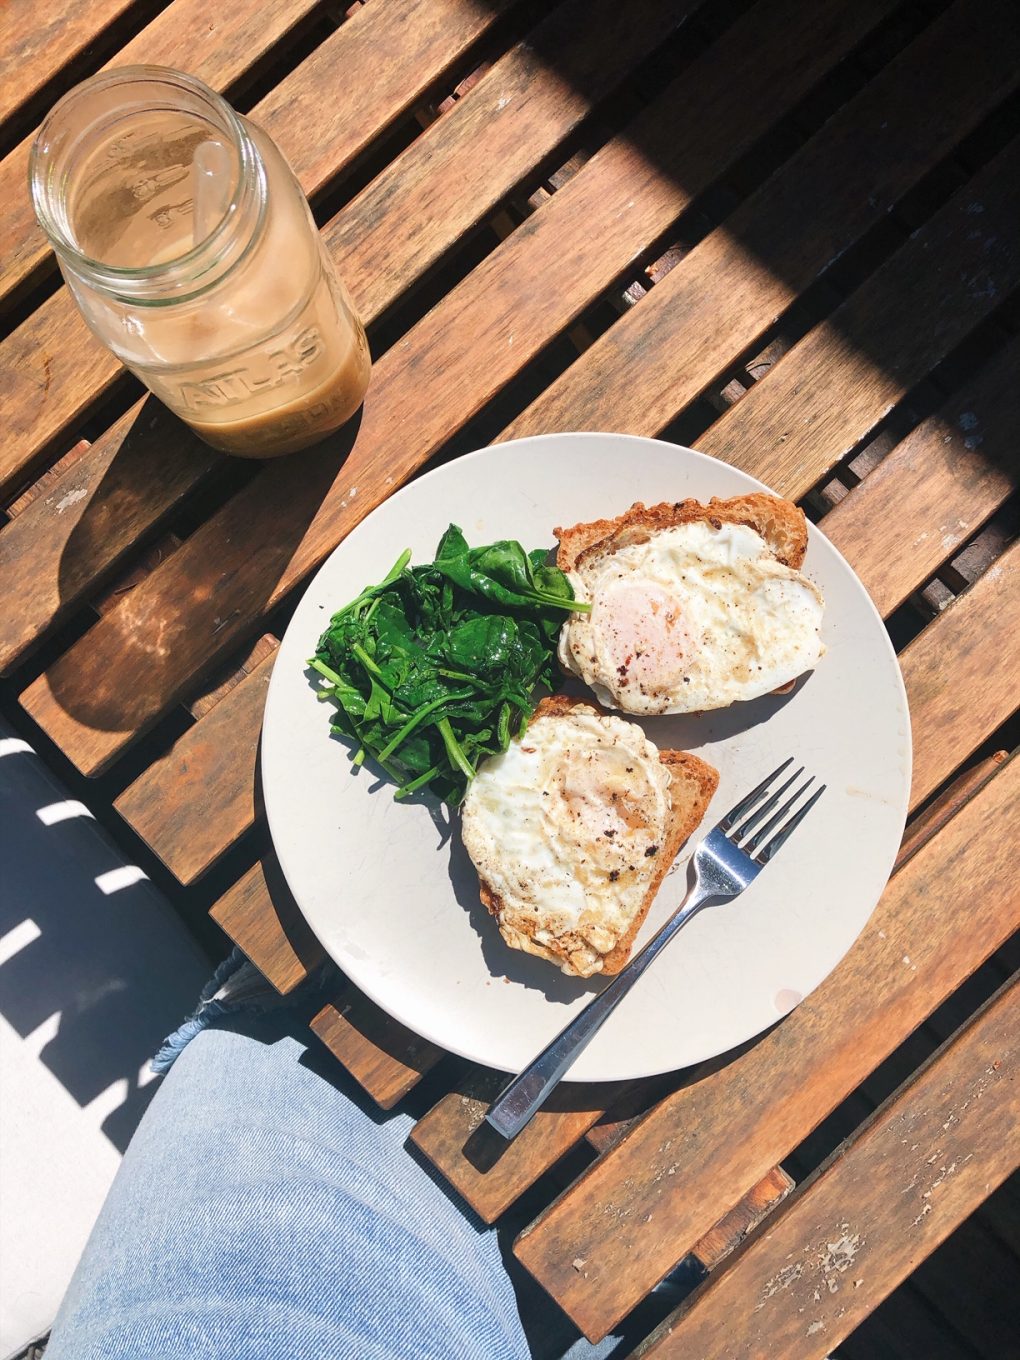 A plate on an outdoor wooden table with two open faced fried egg sandwiches and a side of sauteed spinach